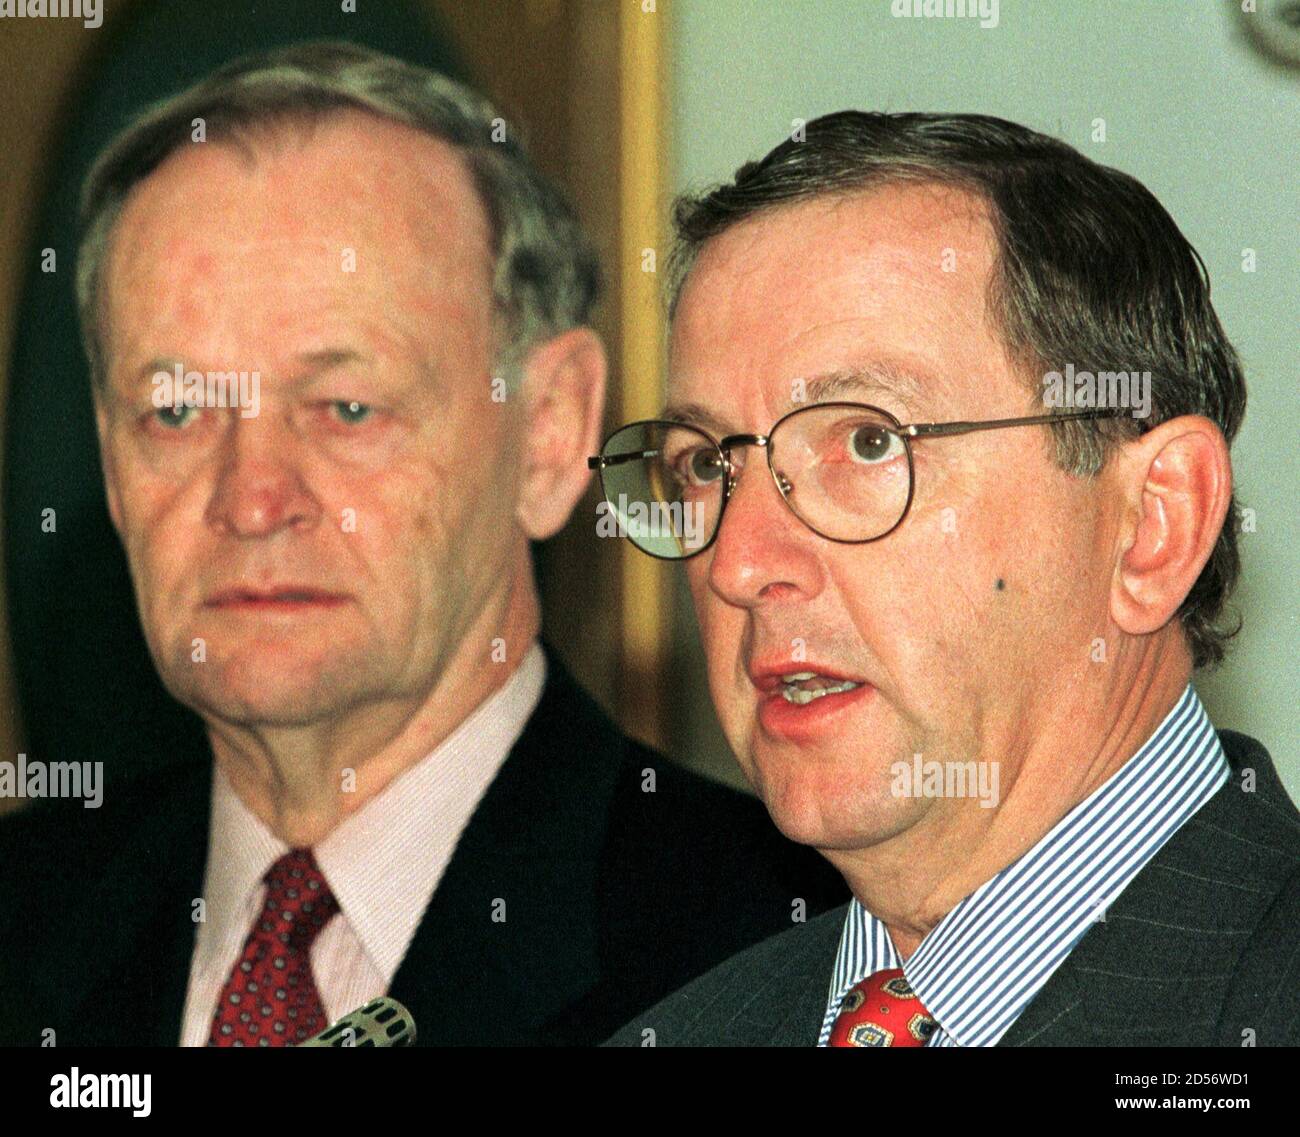 J. Bernard Boudreau (R) speaks at a news conference with Canadian Prime  Minister Jean Chretien (L) after Boudreau was sworn into the federal  cabinet at a ceremony at Rideau Hall in Ottawa,